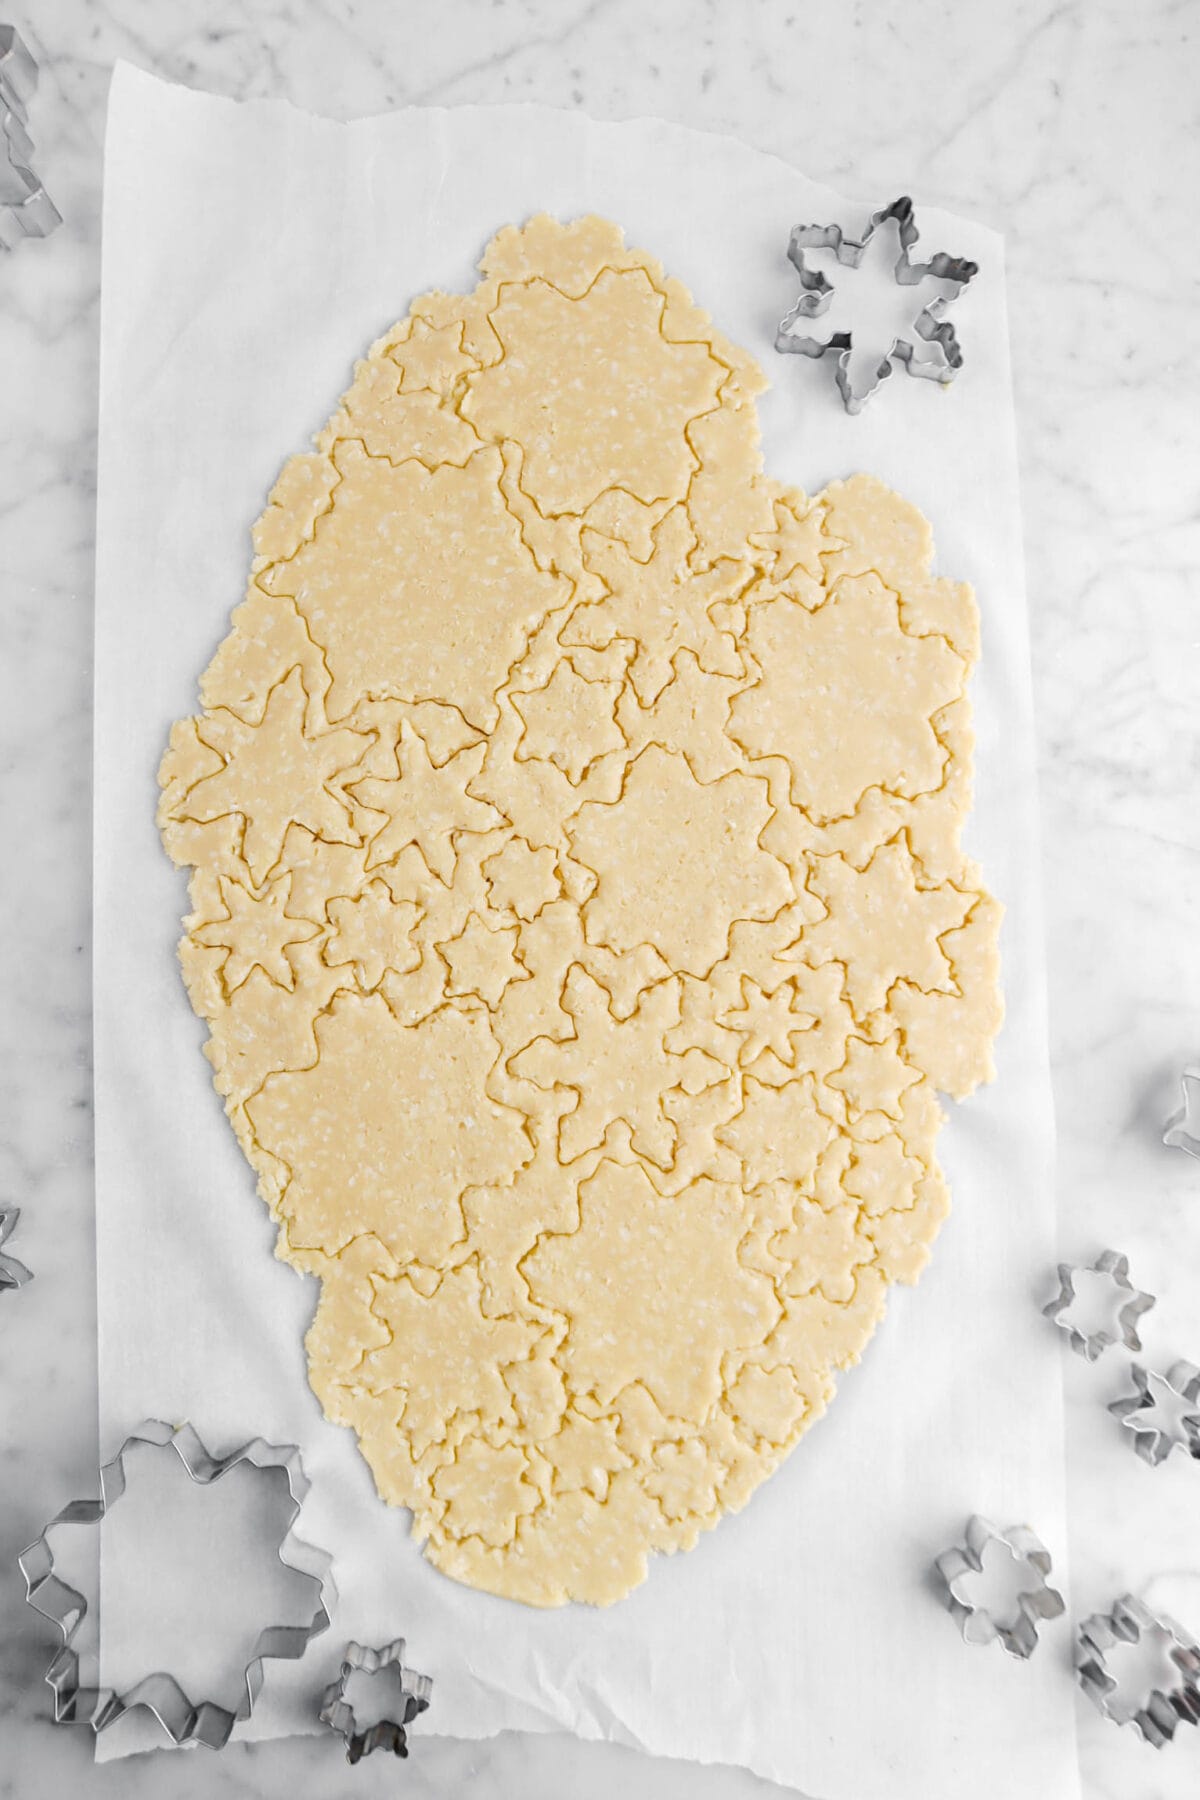 snowflakes cut into cookie dough with silver cookie cutters around.